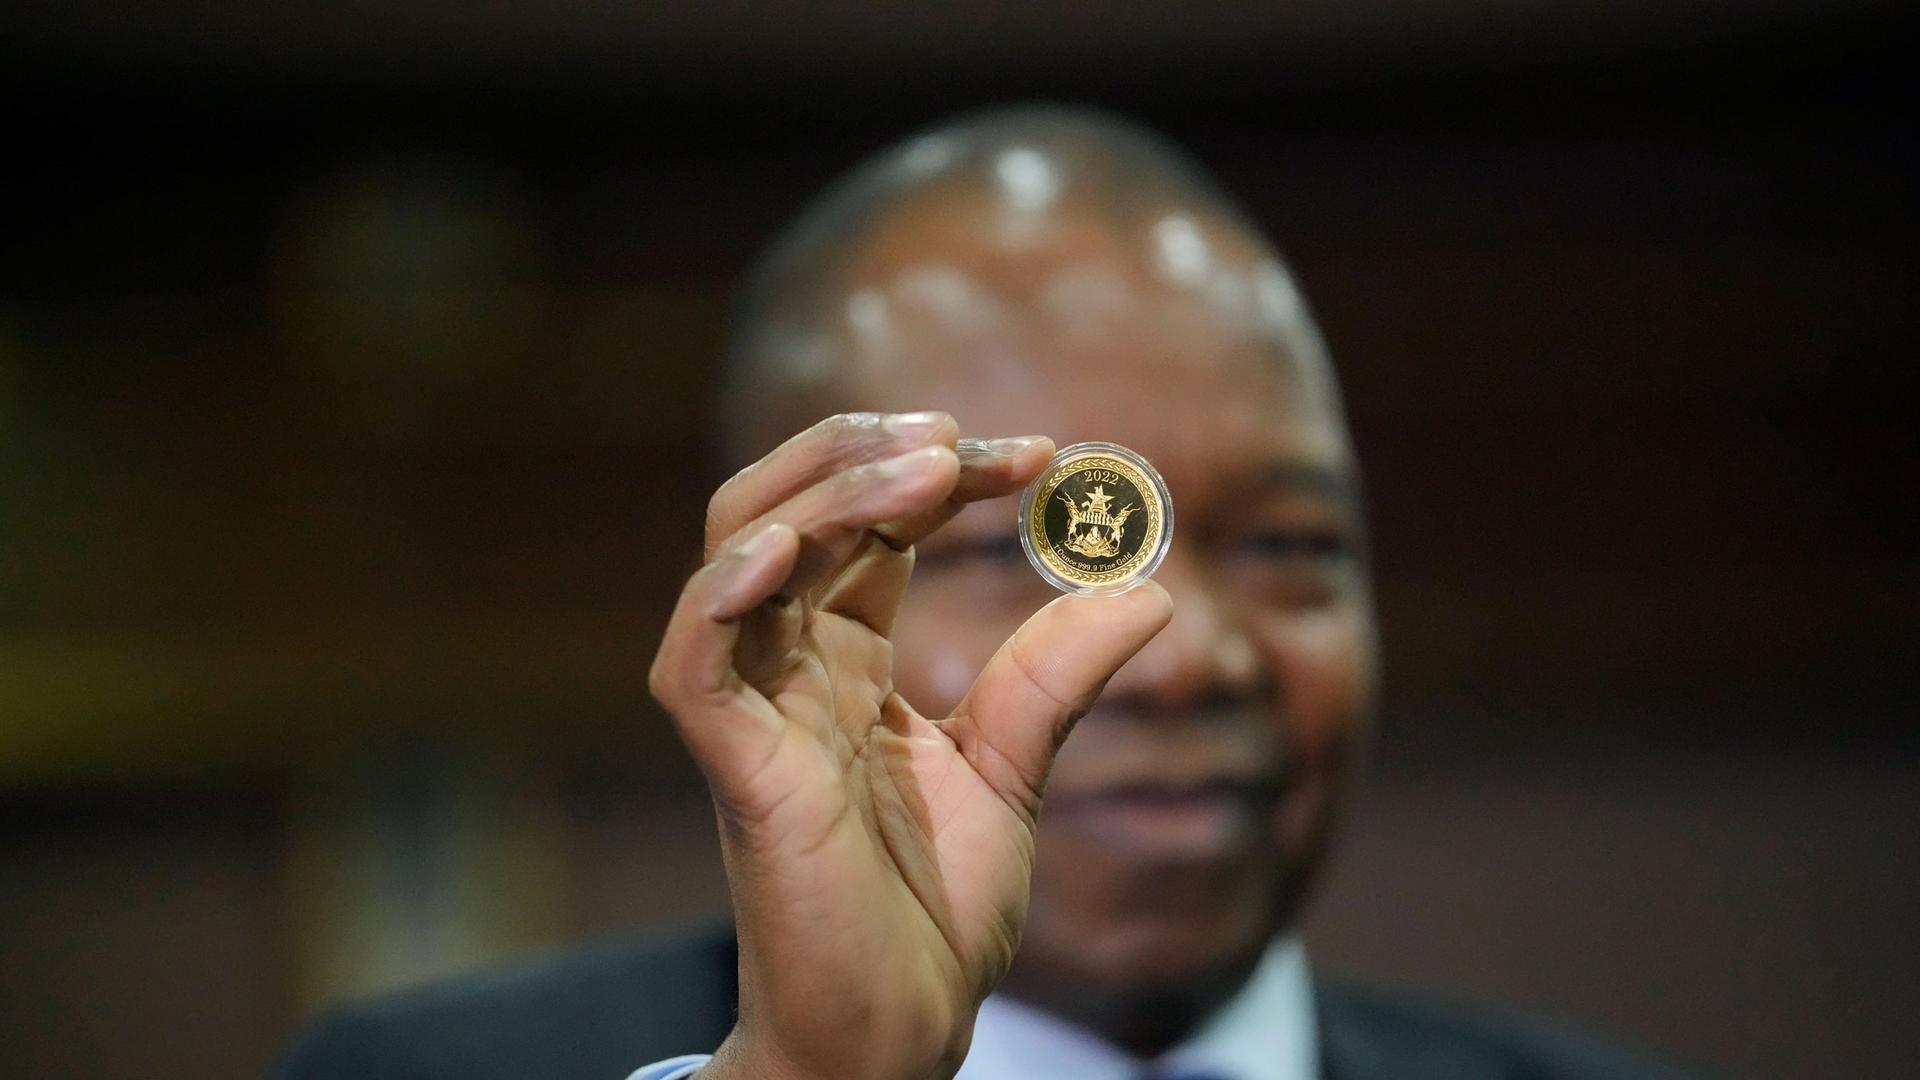 Reserve Bank of Zimbabwe Governor John Mangudya holds a sample of a gold coin at the launch in Harare, Monday, July, 25, 2022.